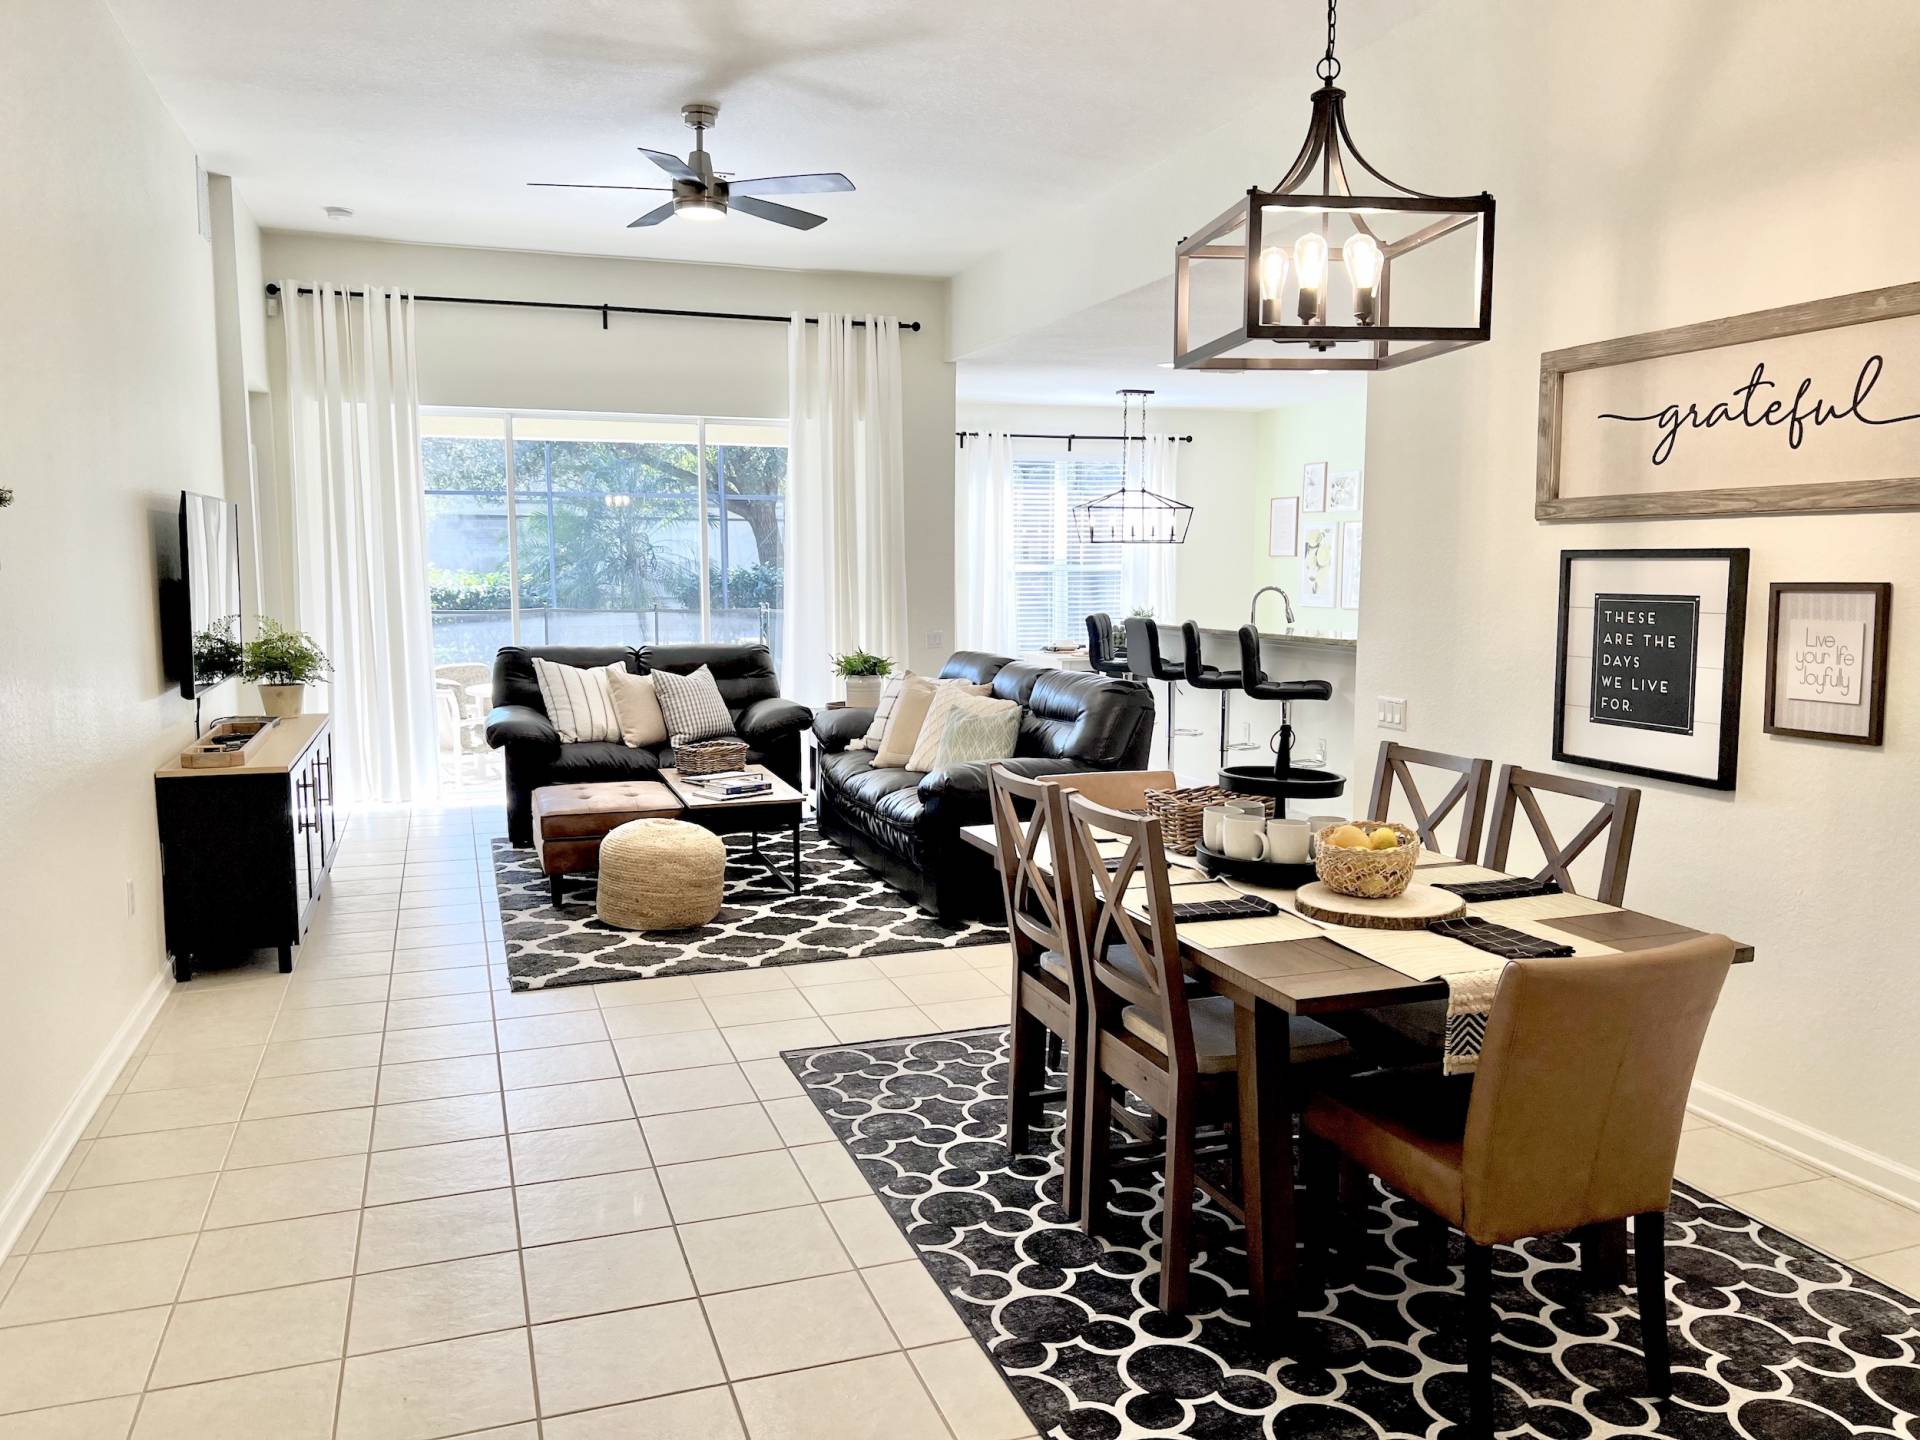 Bright and Open Floor Plan Memory Lane Villa located in Windsor Hills Florida Vacation Rental Home